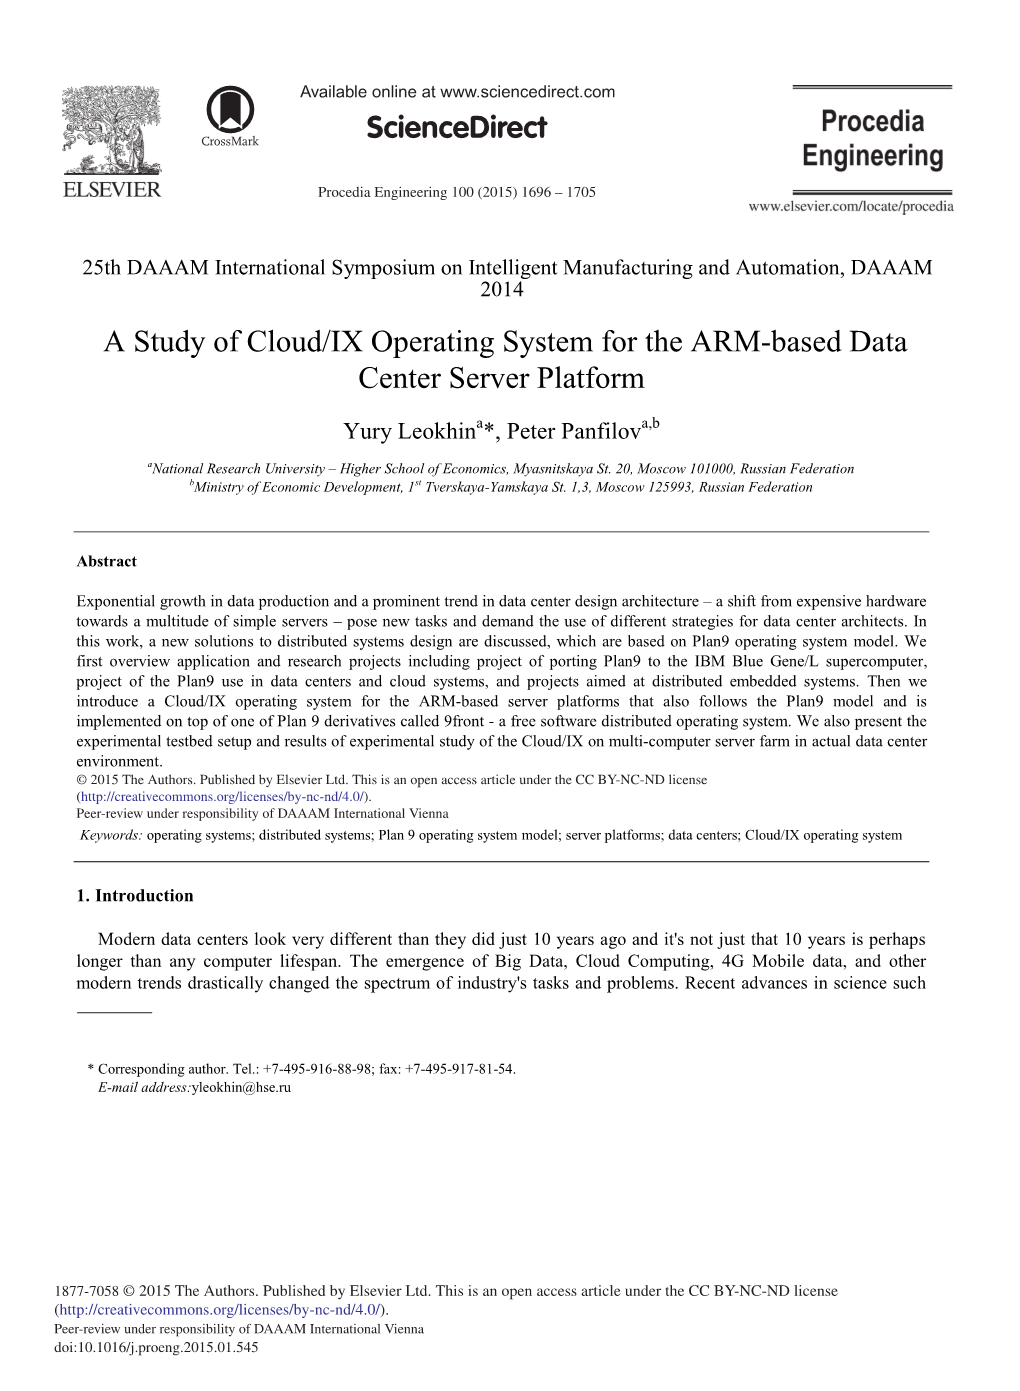 A Study of Cloud/IX Operating System for the ARM-Based Data Center Server Platform